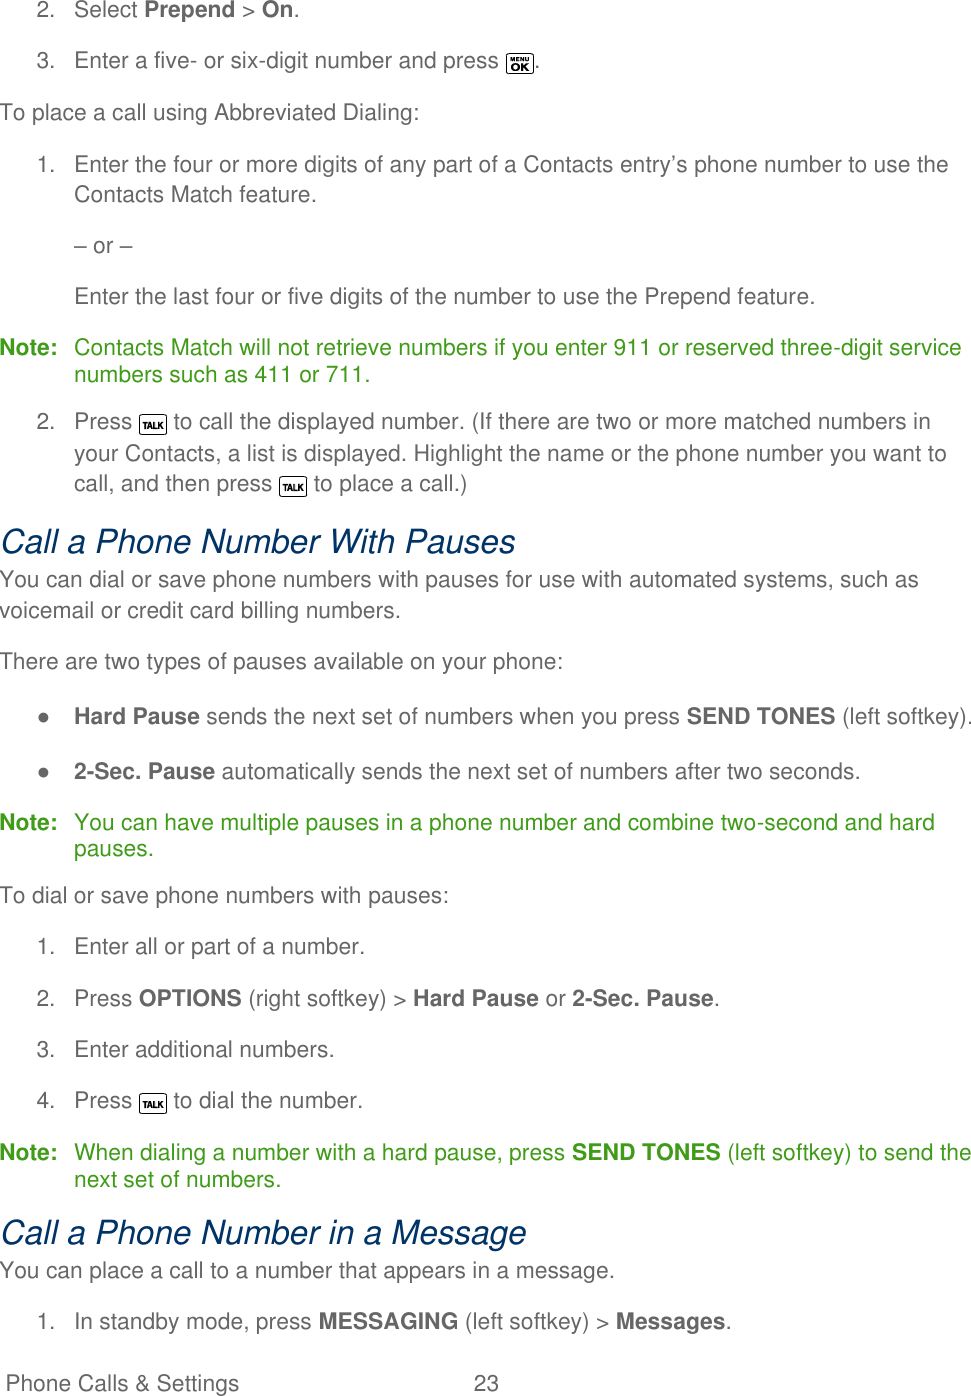   Phone Calls &amp; Settings  23   2.  Select Prepend &gt; On. 3.  Enter a five- or six-digit number and press  . To place a call using Abbreviated Dialing: 1.  Enter the four or more digits of any part of a Contacts entry’s phone number to use the Contacts Match feature. – or – Enter the last four or five digits of the number to use the Prepend feature. Note:  Contacts Match will not retrieve numbers if you enter 911 or reserved three-digit service numbers such as 411 or 711. 2.  Press   to call the displayed number. (If there are two or more matched numbers in your Contacts, a list is displayed. Highlight the name or the phone number you want to call, and then press   to place a call.) Call a Phone Number With Pauses You can dial or save phone numbers with pauses for use with automated systems, such as voicemail or credit card billing numbers. There are two types of pauses available on your phone: ● Hard Pause sends the next set of numbers when you press SEND TONES (left softkey). ● 2-Sec. Pause automatically sends the next set of numbers after two seconds. Note:  You can have multiple pauses in a phone number and combine two-second and hard pauses.  To dial or save phone numbers with pauses: 1.  Enter all or part of a number. 2.  Press OPTIONS (right softkey) &gt; Hard Pause or 2-Sec. Pause. 3.  Enter additional numbers. 4.  Press   to dial the number. Note:  When dialing a number with a hard pause, press SEND TONES (left softkey) to send the next set of numbers.  Call a Phone Number in a Message You can place a call to a number that appears in a message. 1.  In standby mode, press MESSAGING (left softkey) &gt; Messages. 